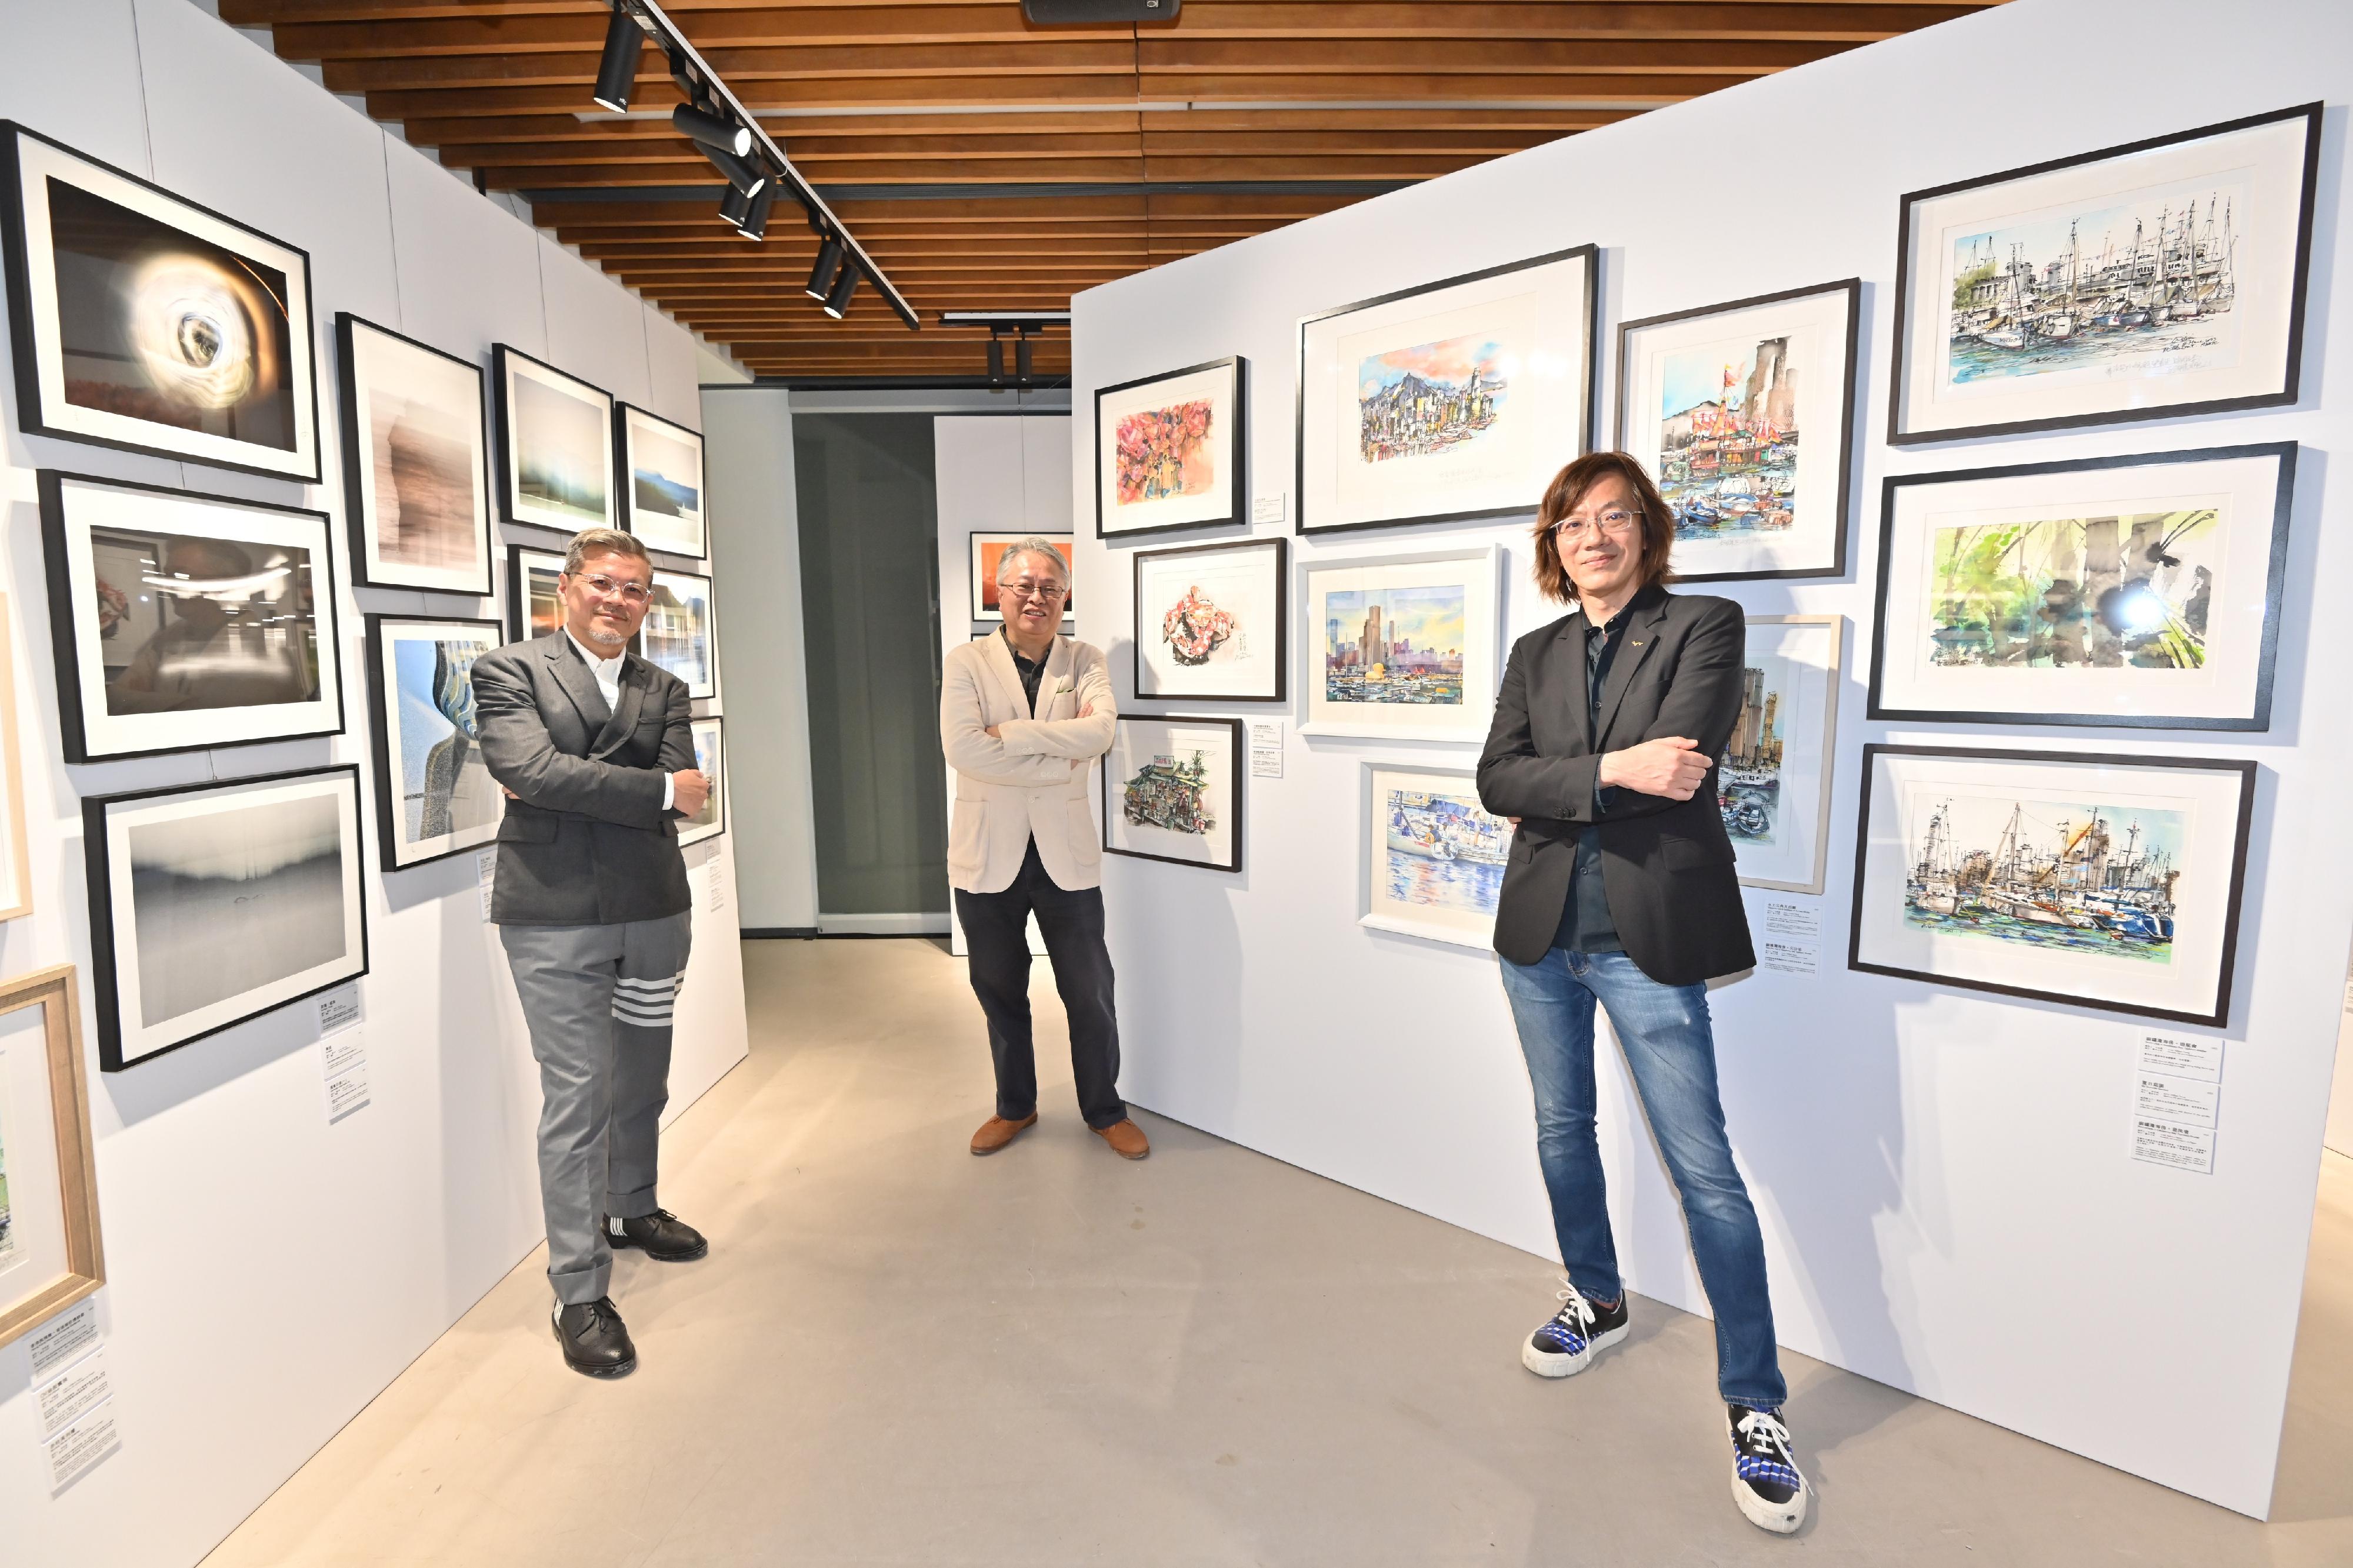 The new exhibition of the Oil Street Art Space, "Vita in Movimento", will be on display from tomorrow (December 16), which showcases nearly 100 watercolour paintings and photography works focusing on Hong Kong's natural landscape, old and new buildings, as well as snapshots of people's daily lives. Photo shows the three Hong Kong architects and artists (from left), Jeff Tung, William Tseng and Vincent Ng.